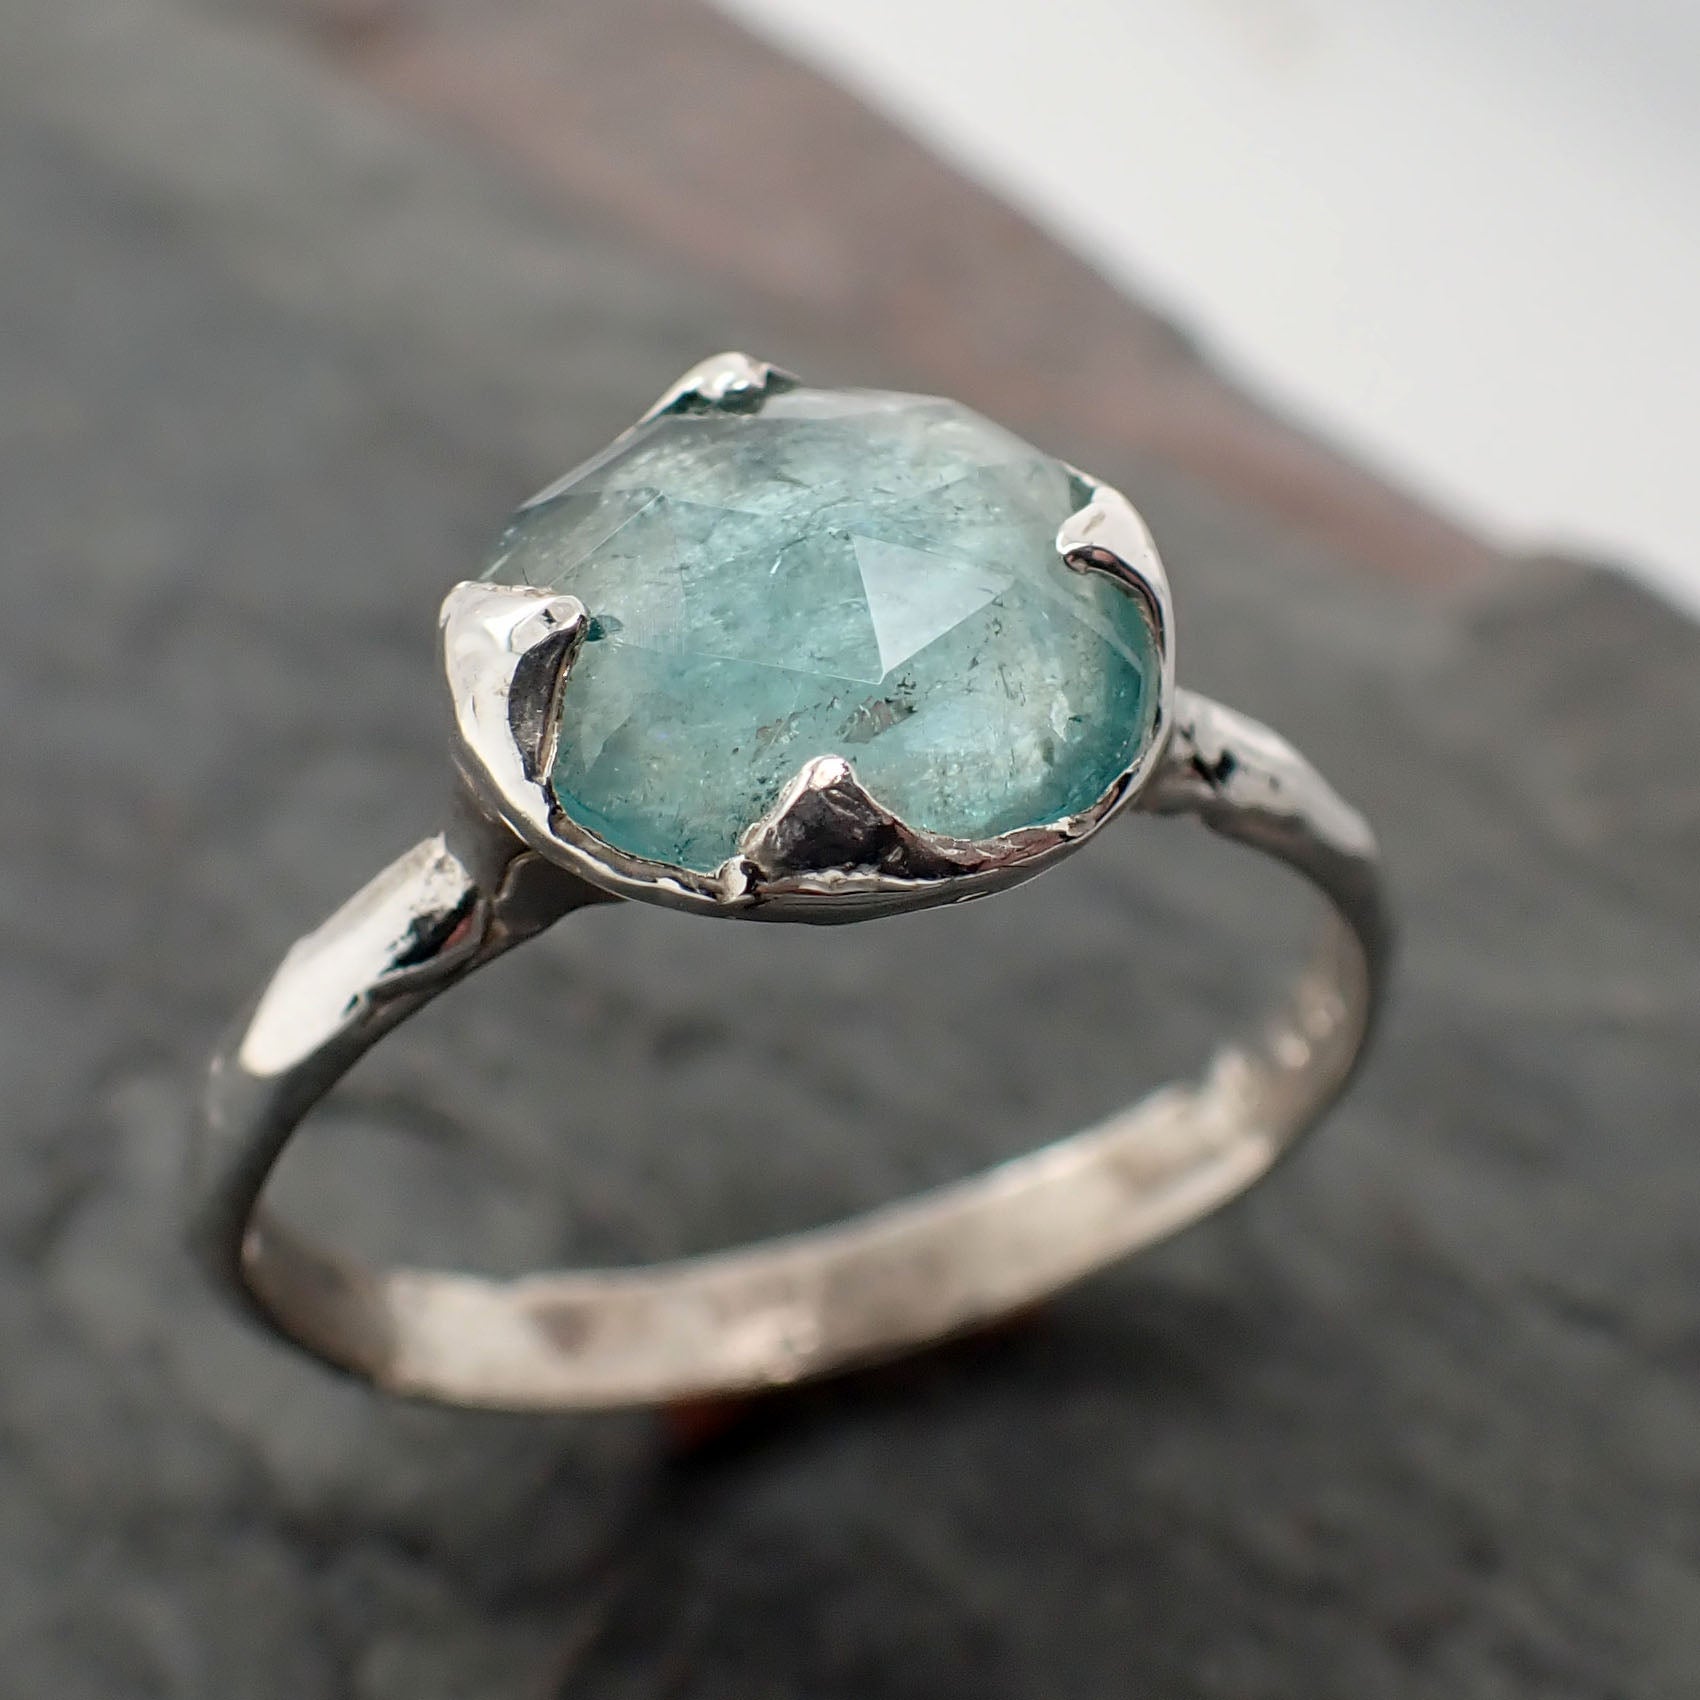 Delicate Raw Blue Tourmaline Ring – Aquarian Thoughts Jewelry